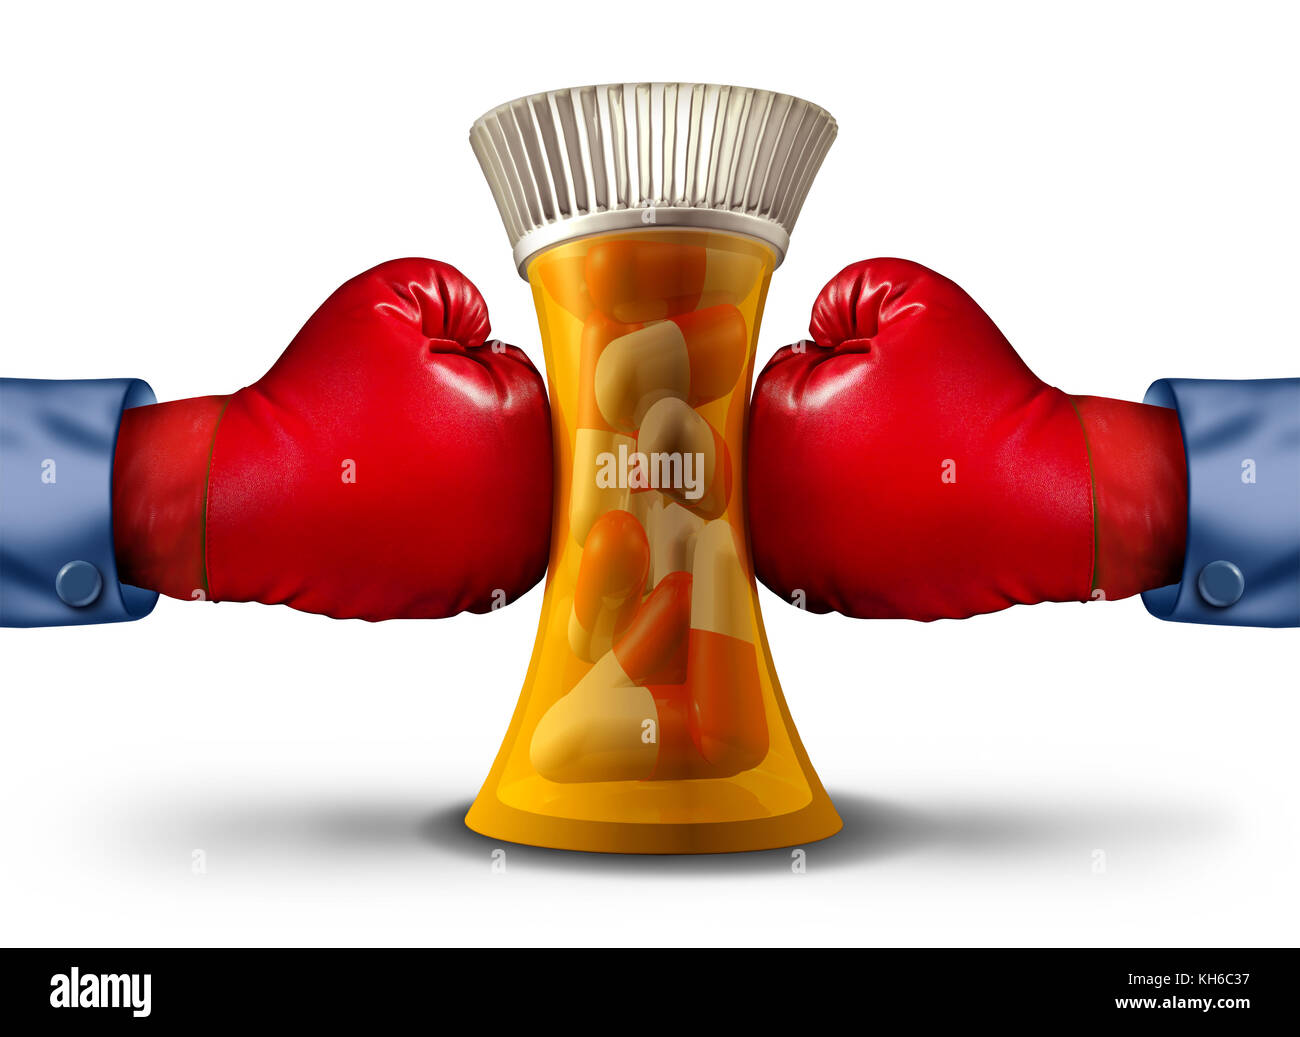 Pharmaceutical pressure and health insurance stress concept as boxing gloves squeezing a prescription drug bottle or vitamin container. Stock Photo